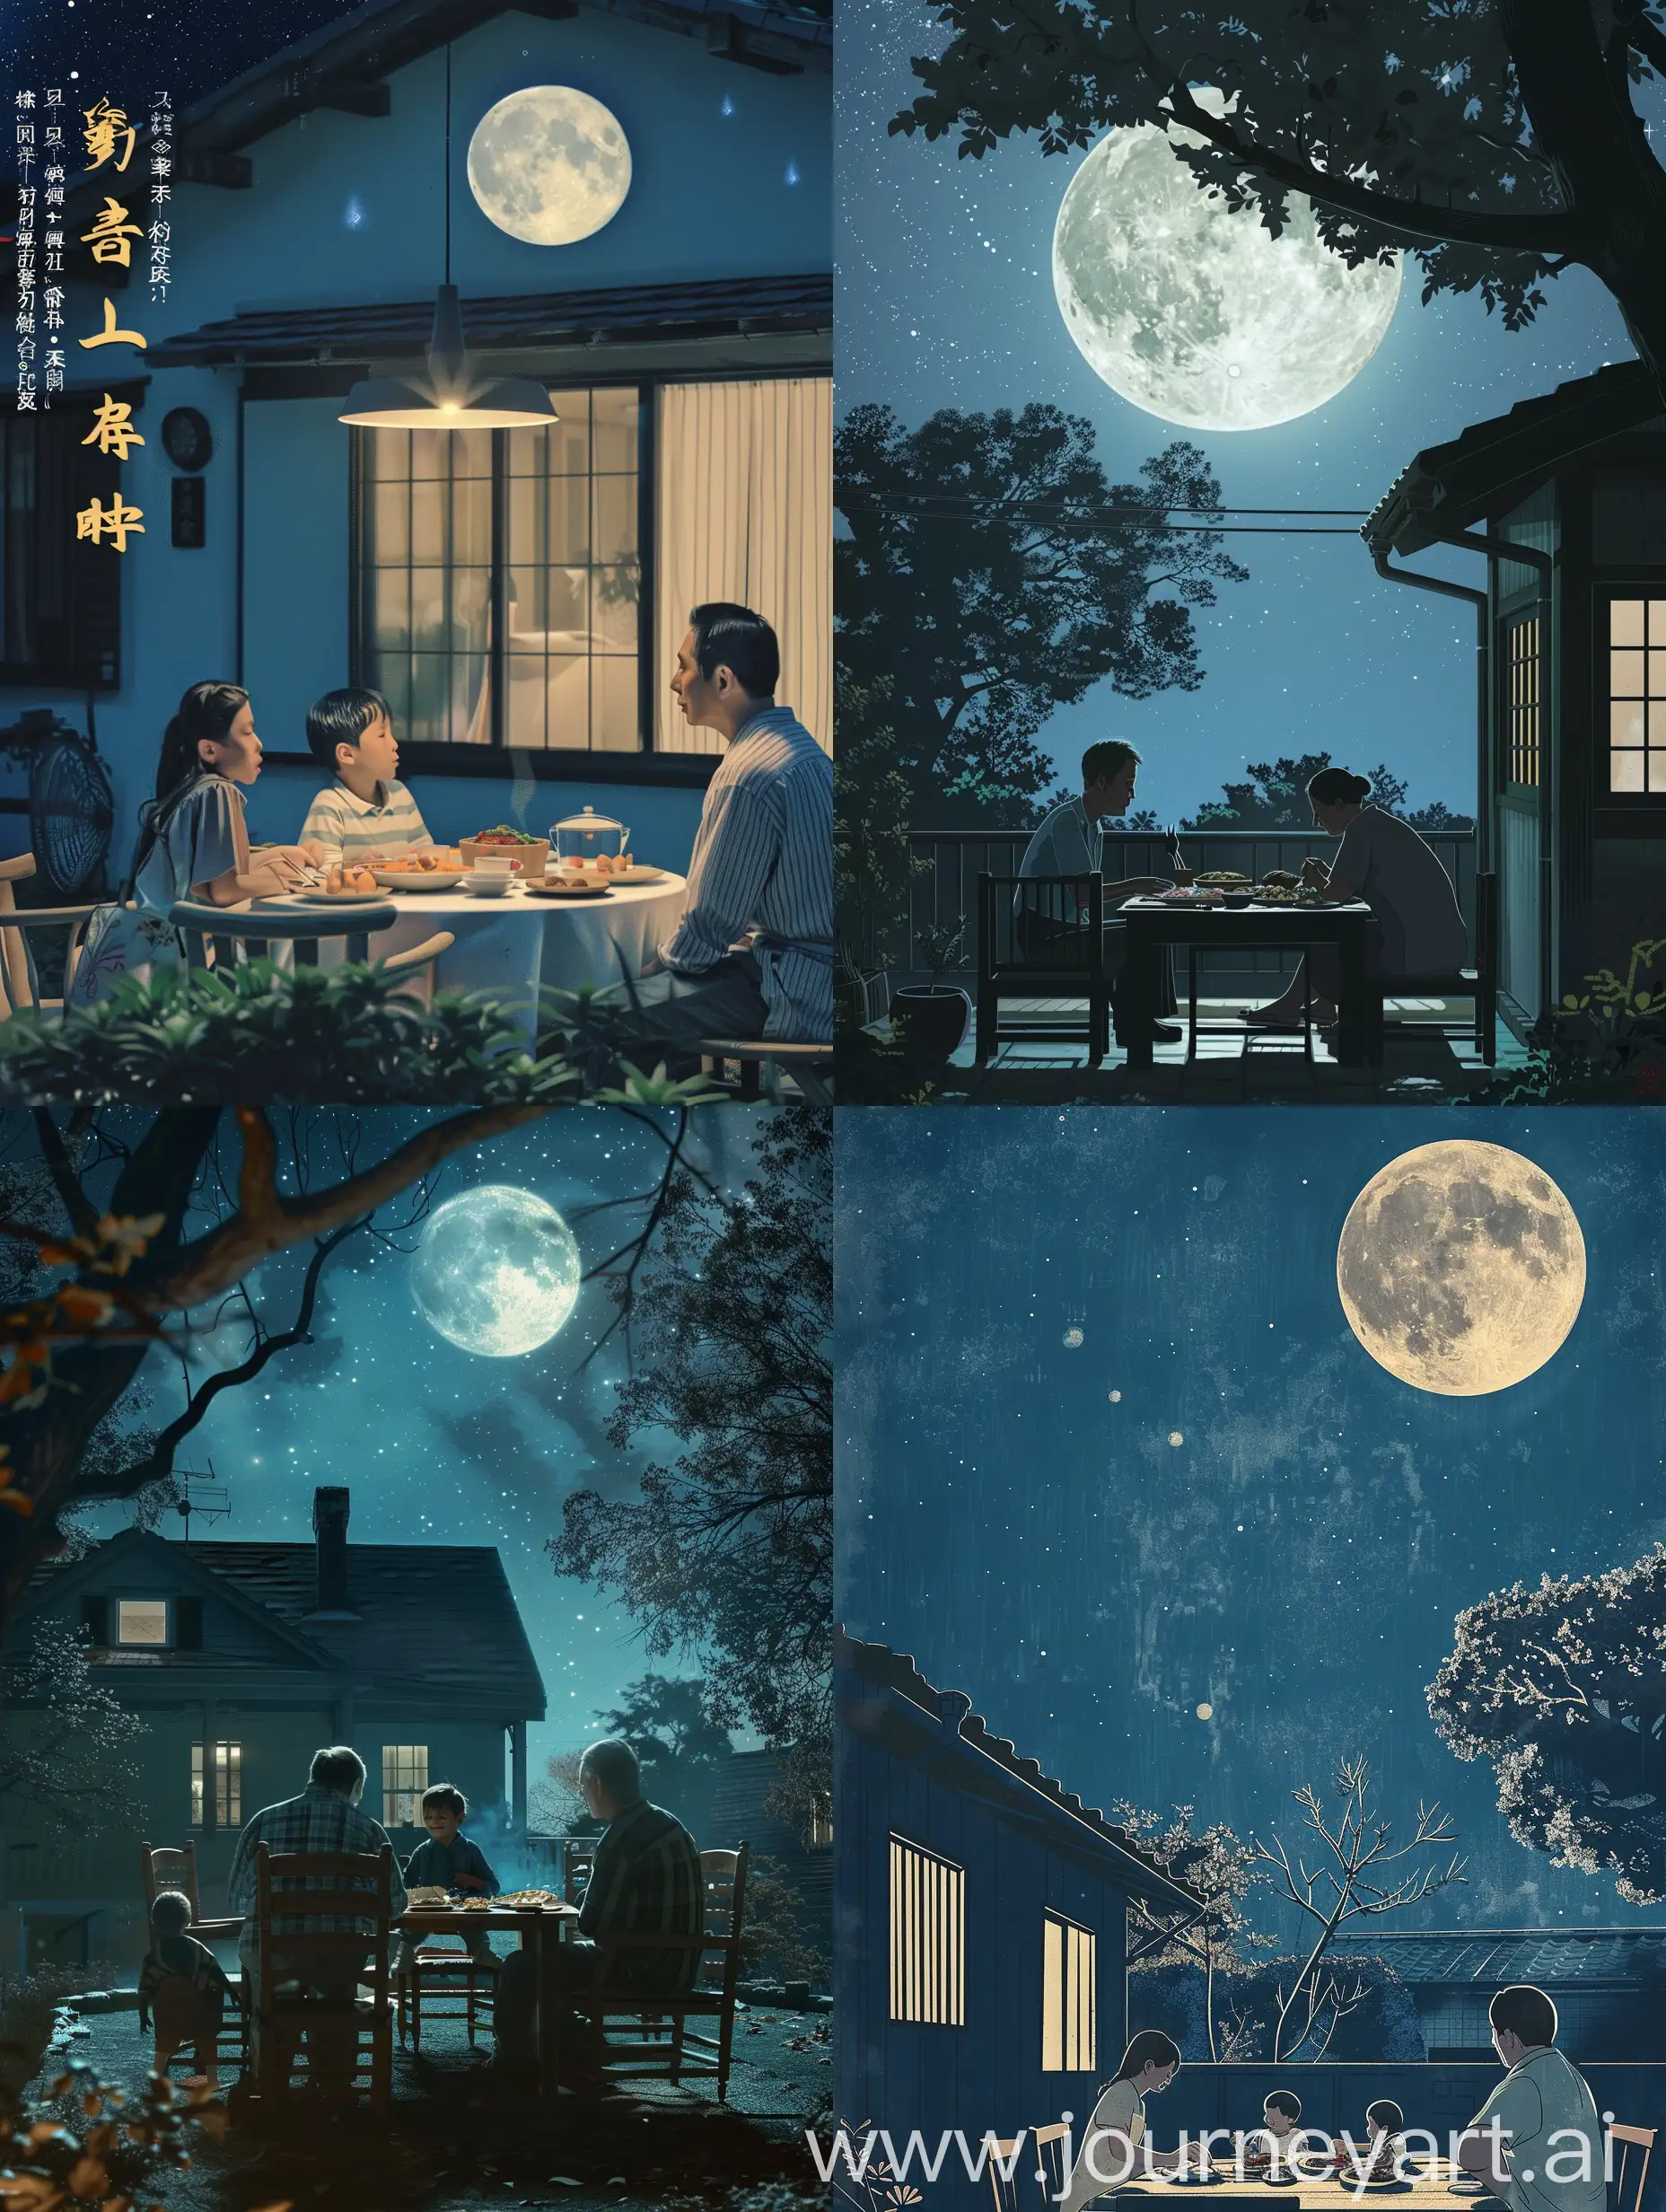 Help me generate a poster, poster design reference:
In the moonlight, there is already a meal on the table, and a scene of a middle-aged couple waiting for their children to eat in a house